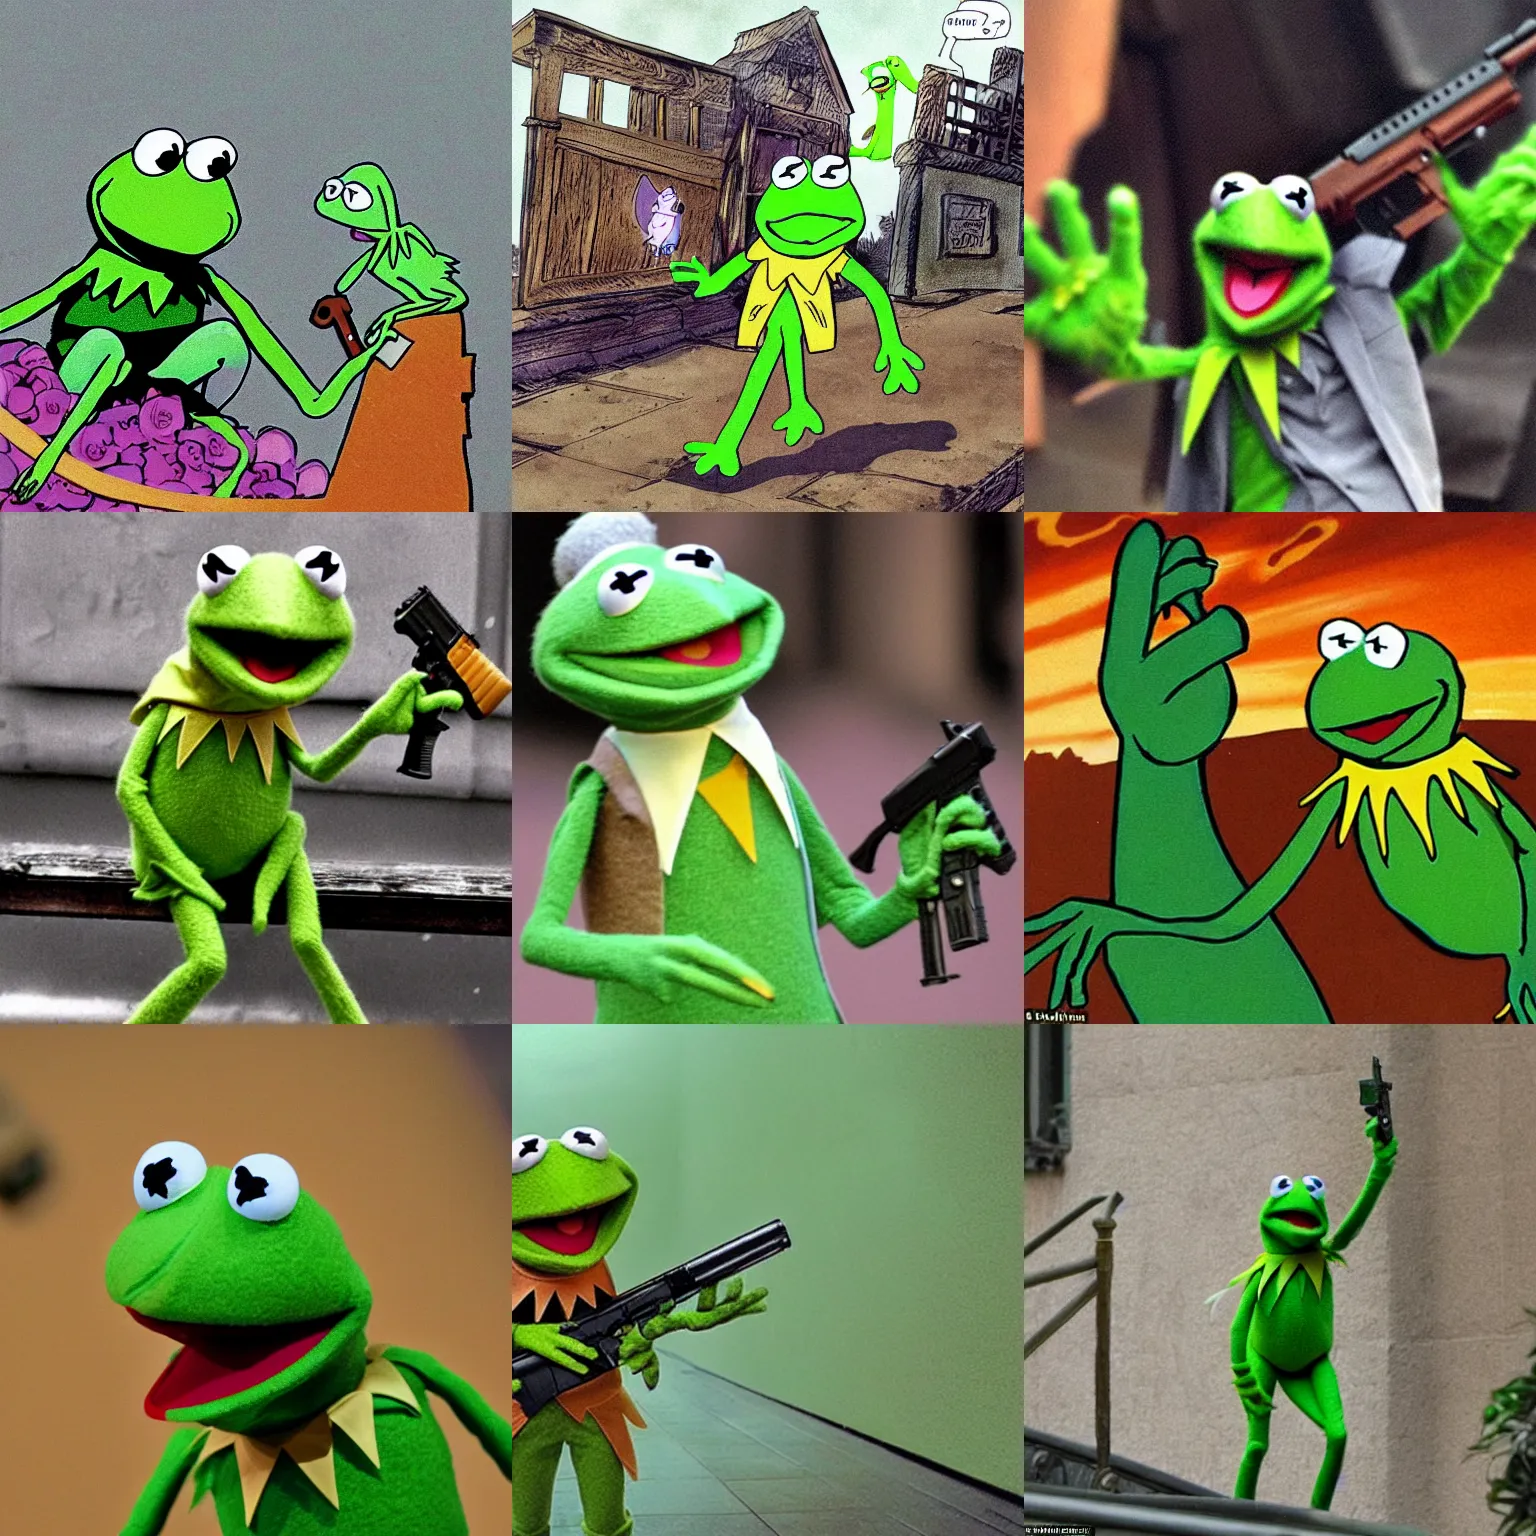 Prompt: Kermit the frog arriving at heaven with a gun to kill god for his crimes against humanity. Kermit the frog is liberating heaven with assault rifles